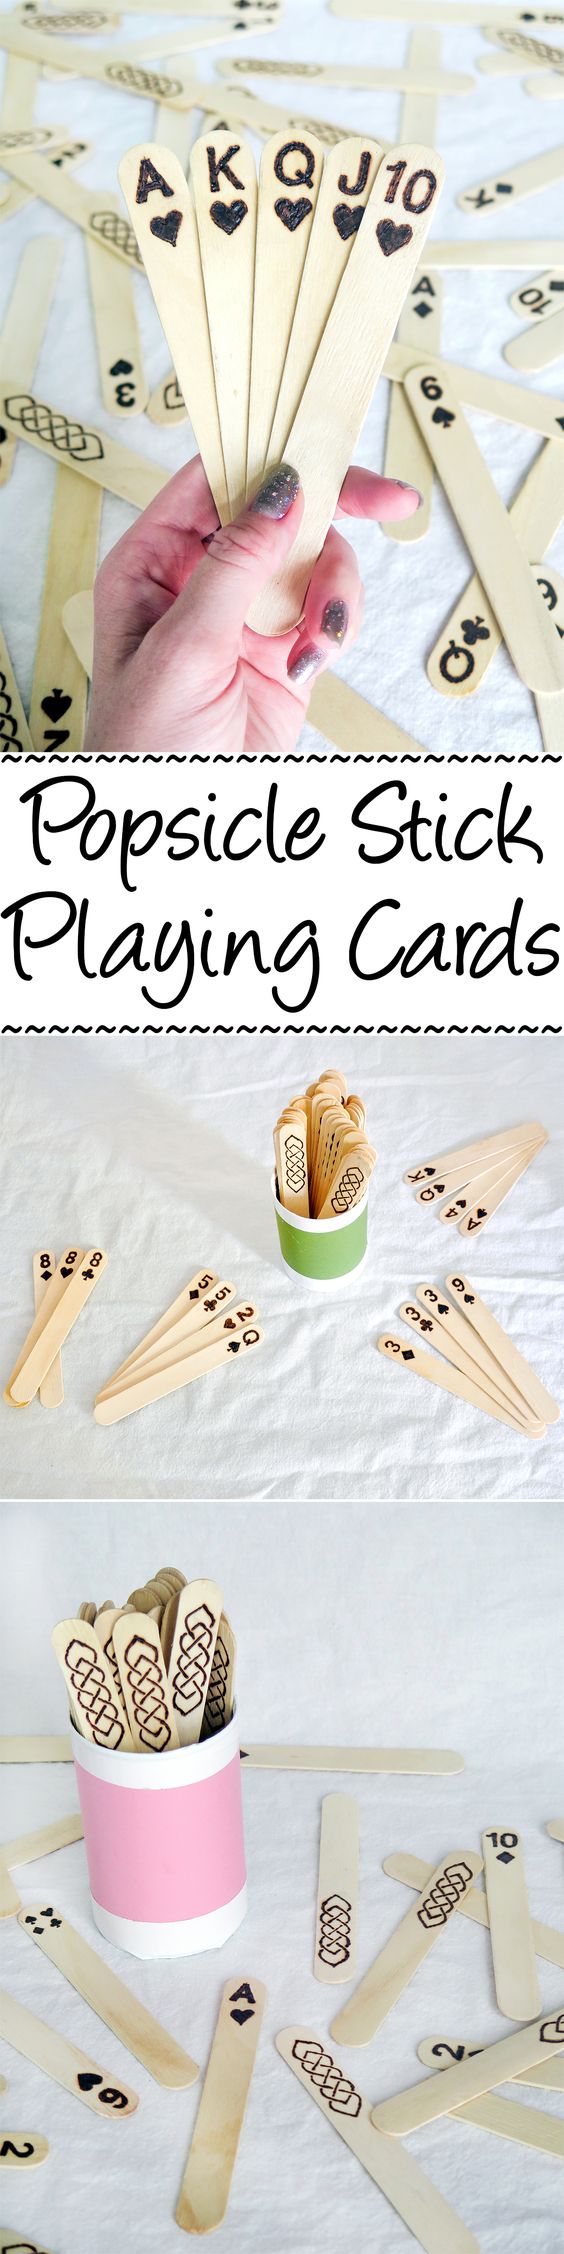 Popsicle Stick Playing Cards. 